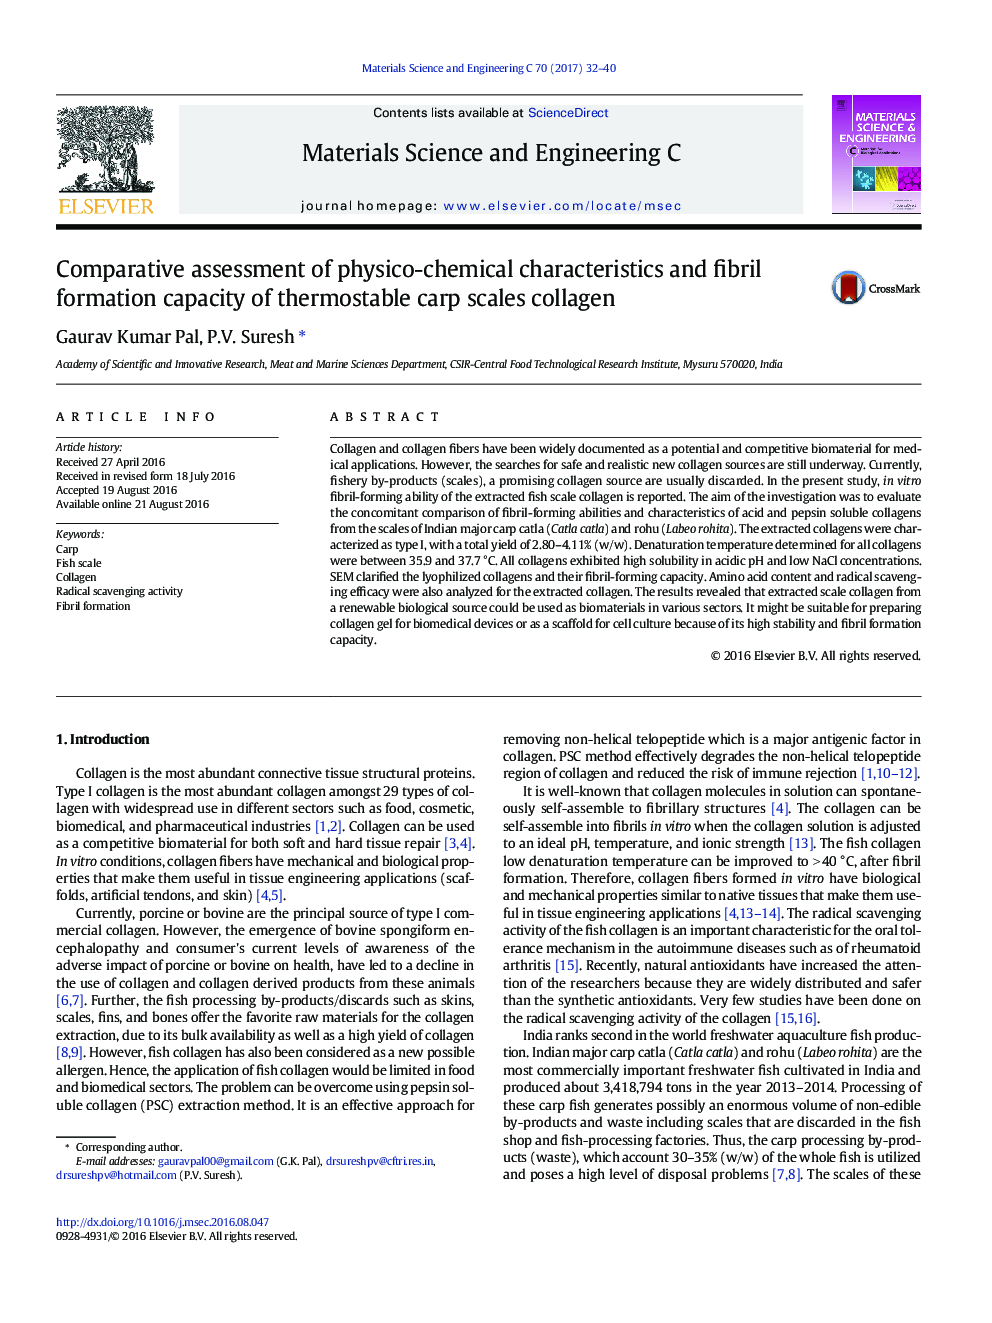 Comparative assessment of physico-chemical characteristics and fibril formation capacity of thermostable carp scales collagen